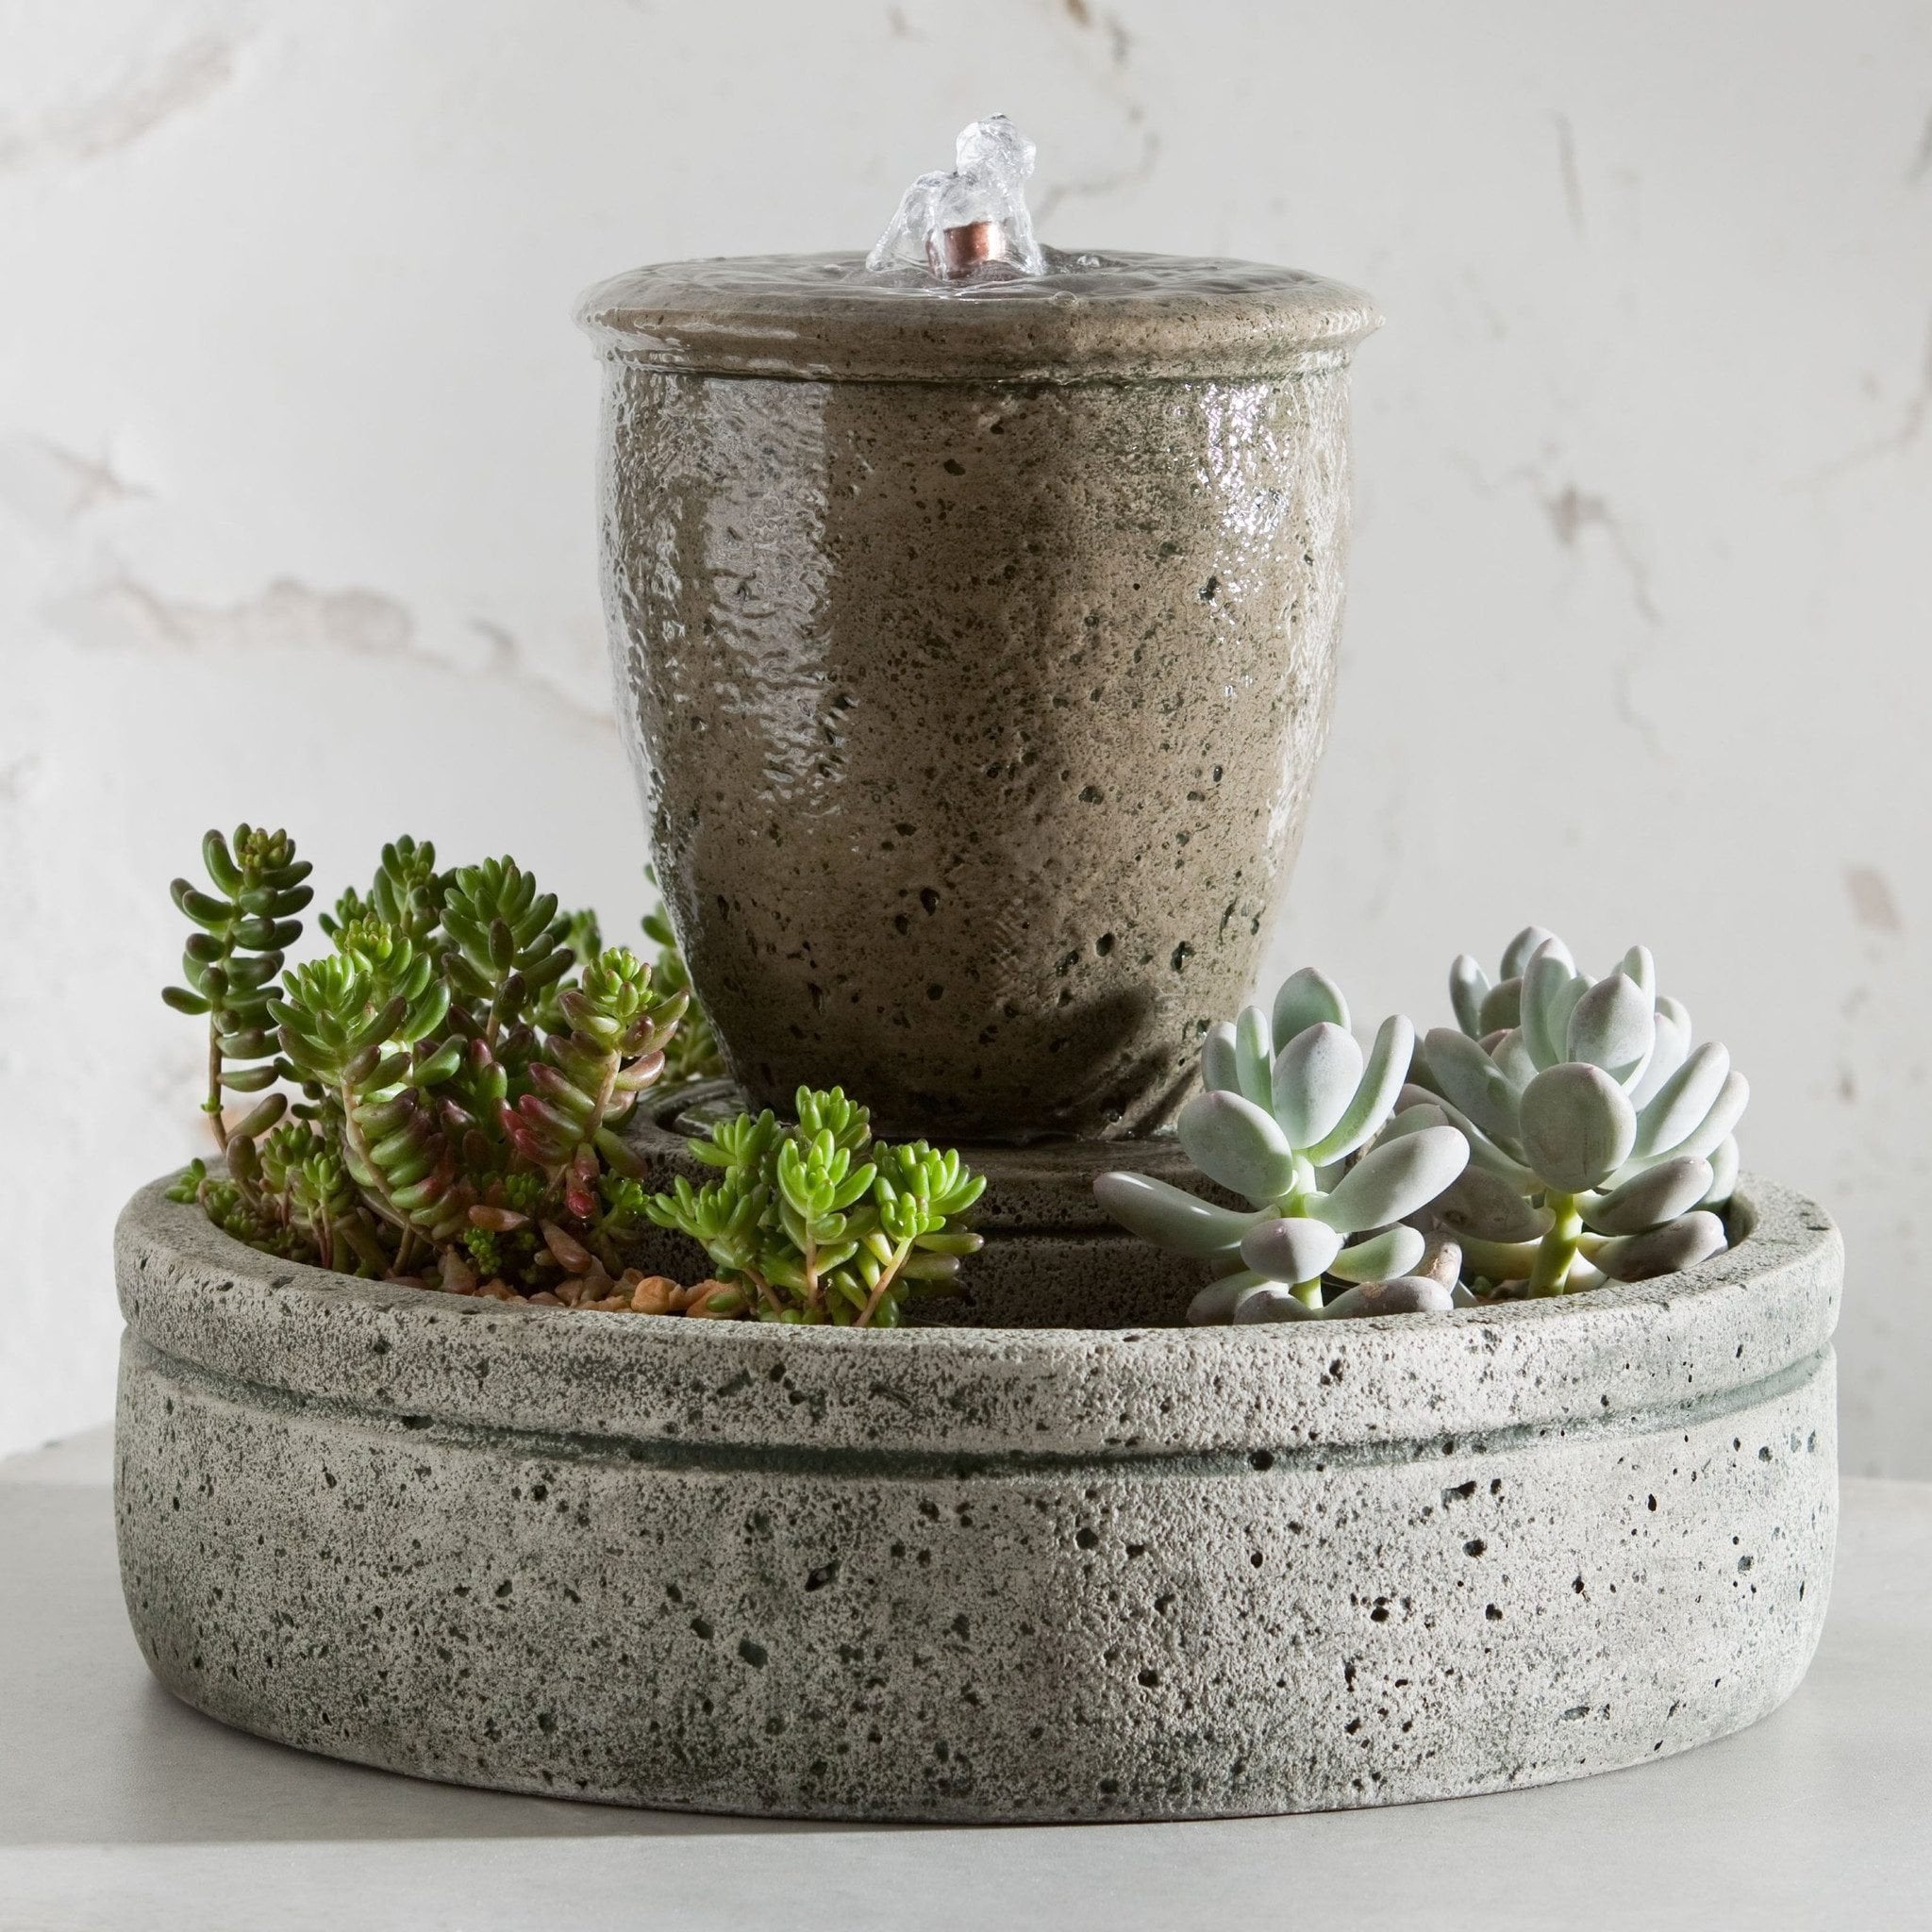 M-Series Rustic Spa Fountain With Planter in Cast Stone by Campania International FT-178